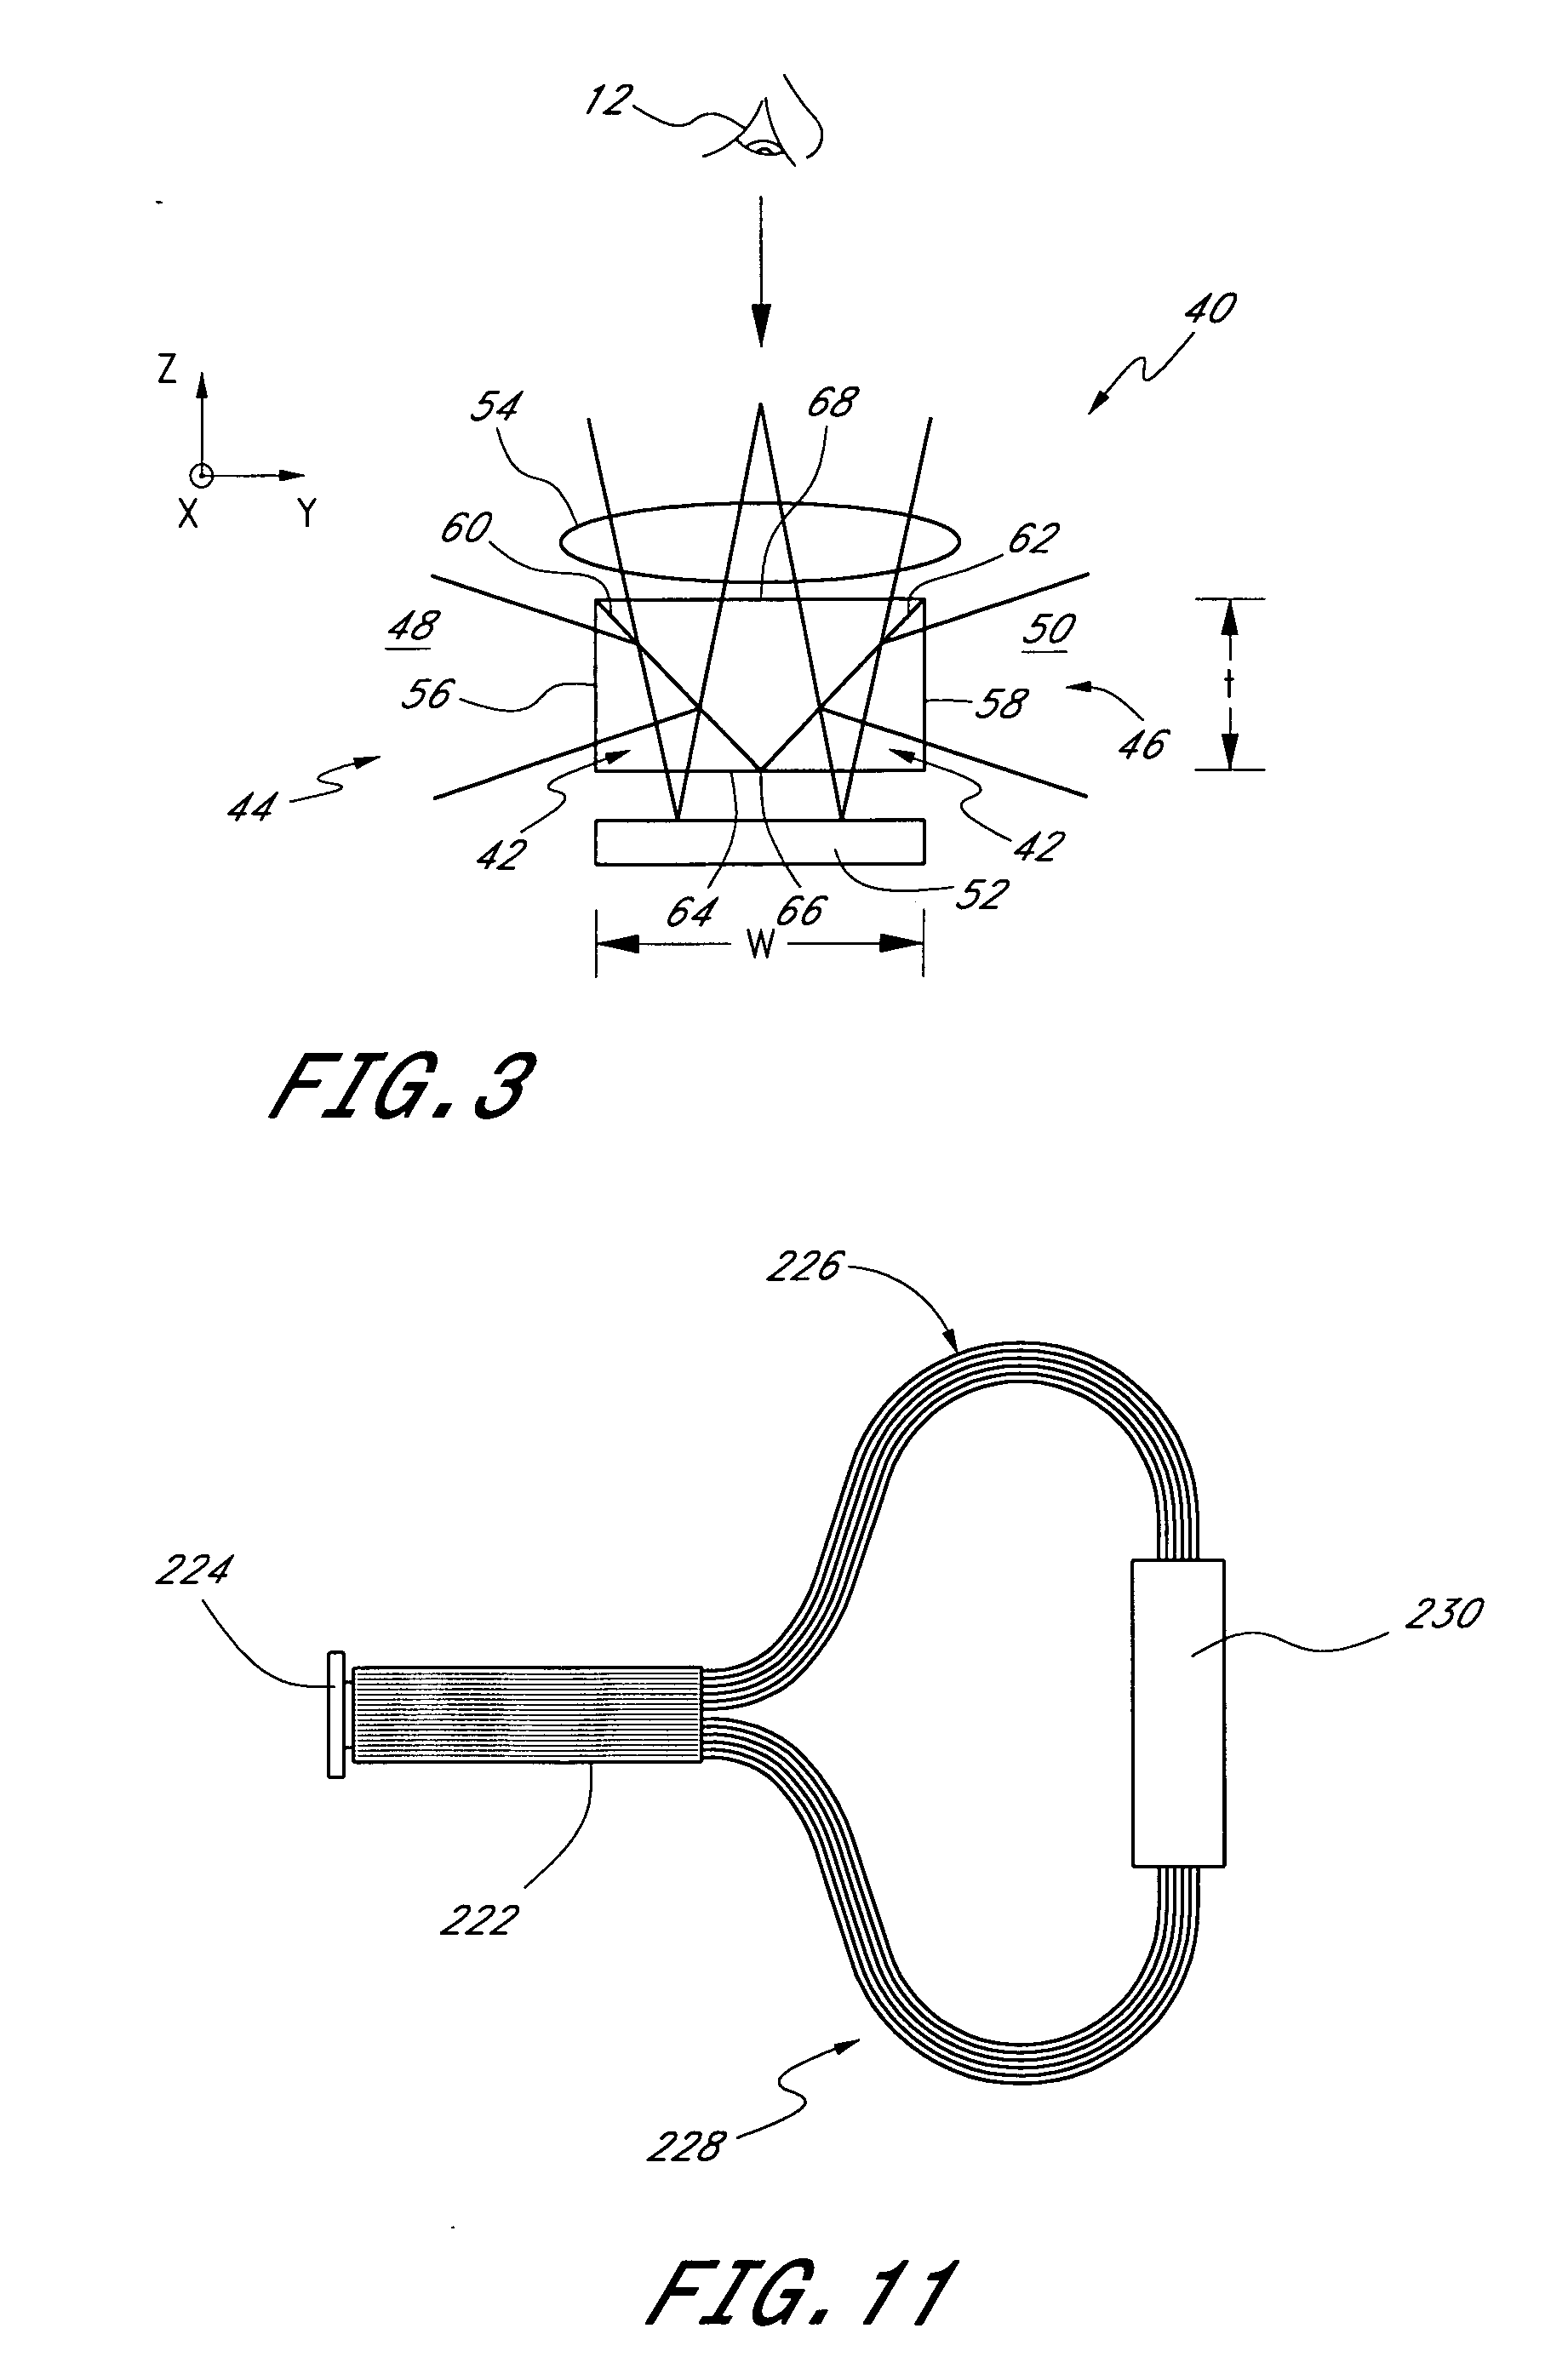 Head mounted display devices